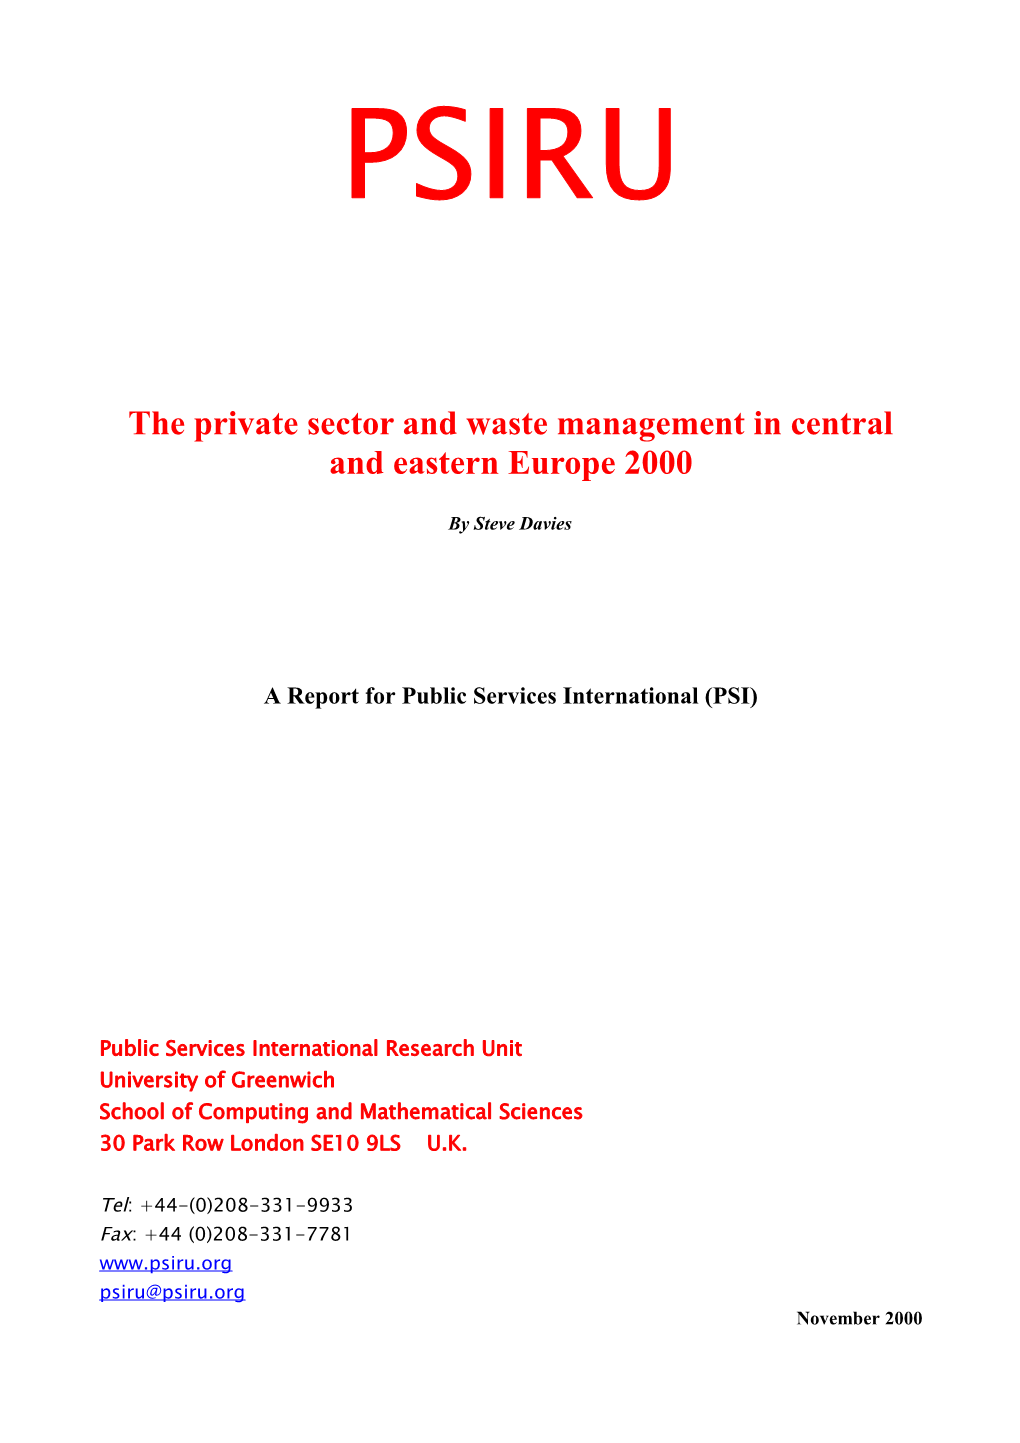 The Private Sector and Waste Management in Central and Eastern Europe 2000